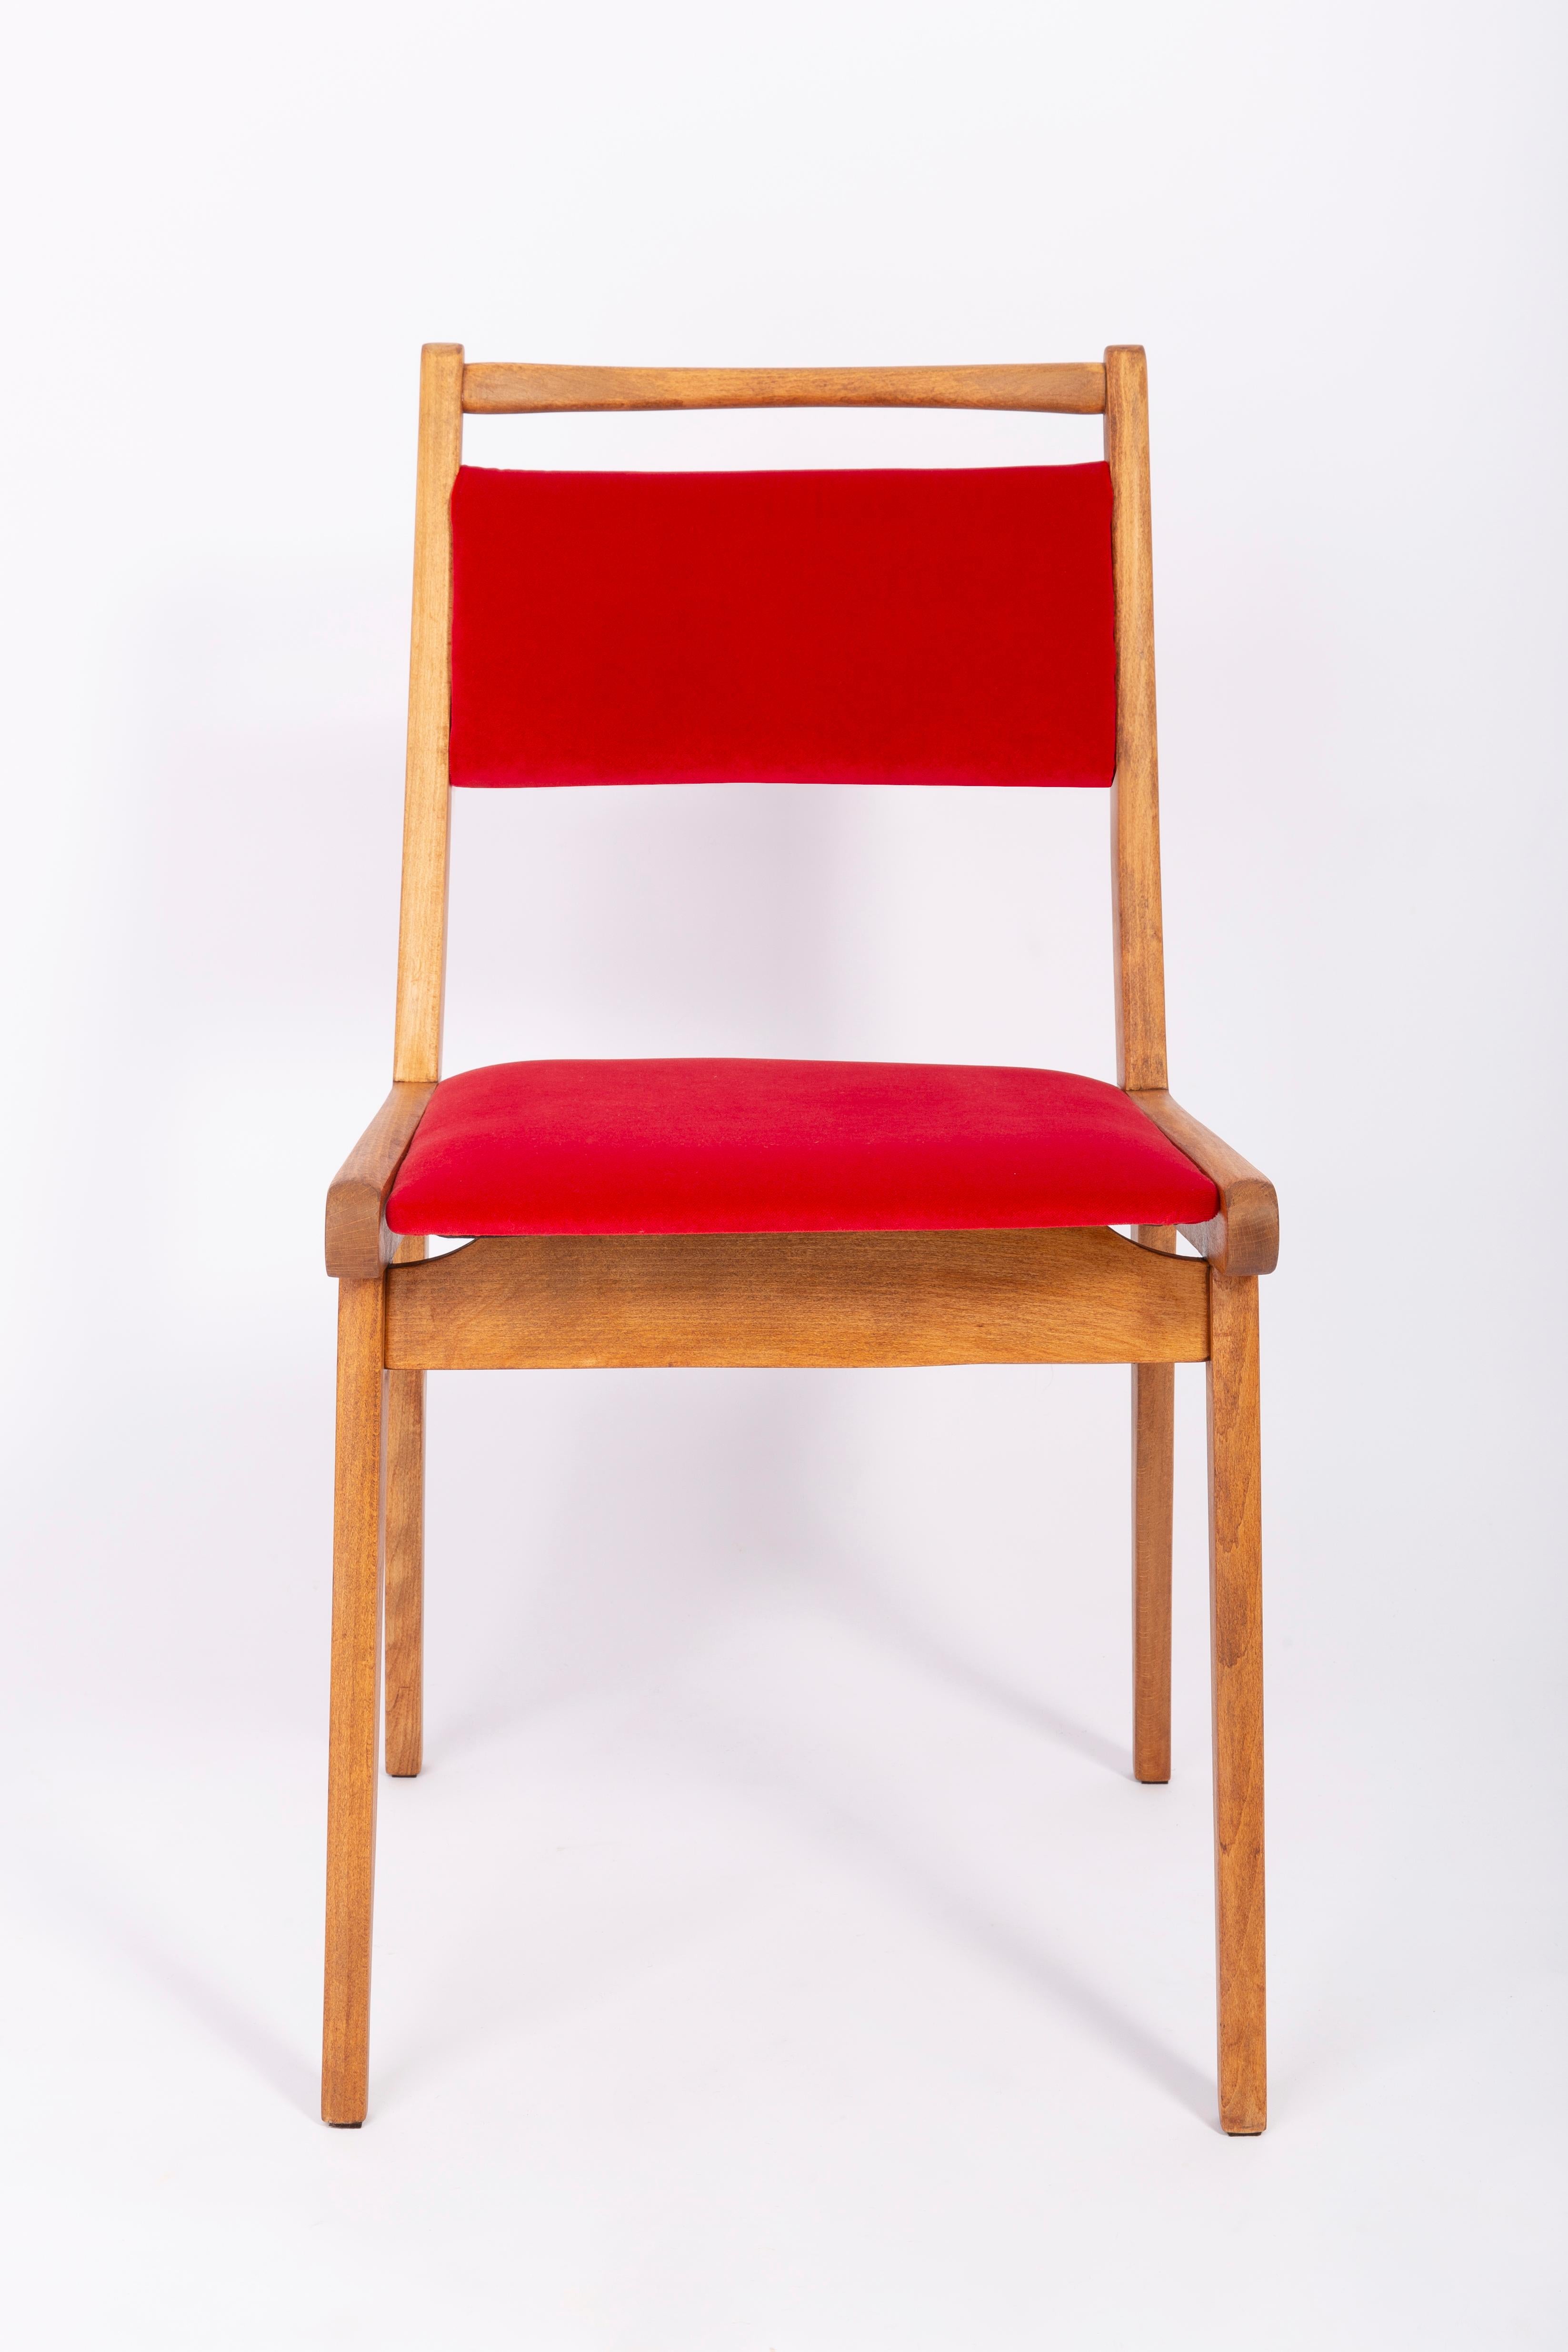 Hand-Crafted 20th Century Red Velvet Chair, Poland, 1960s For Sale